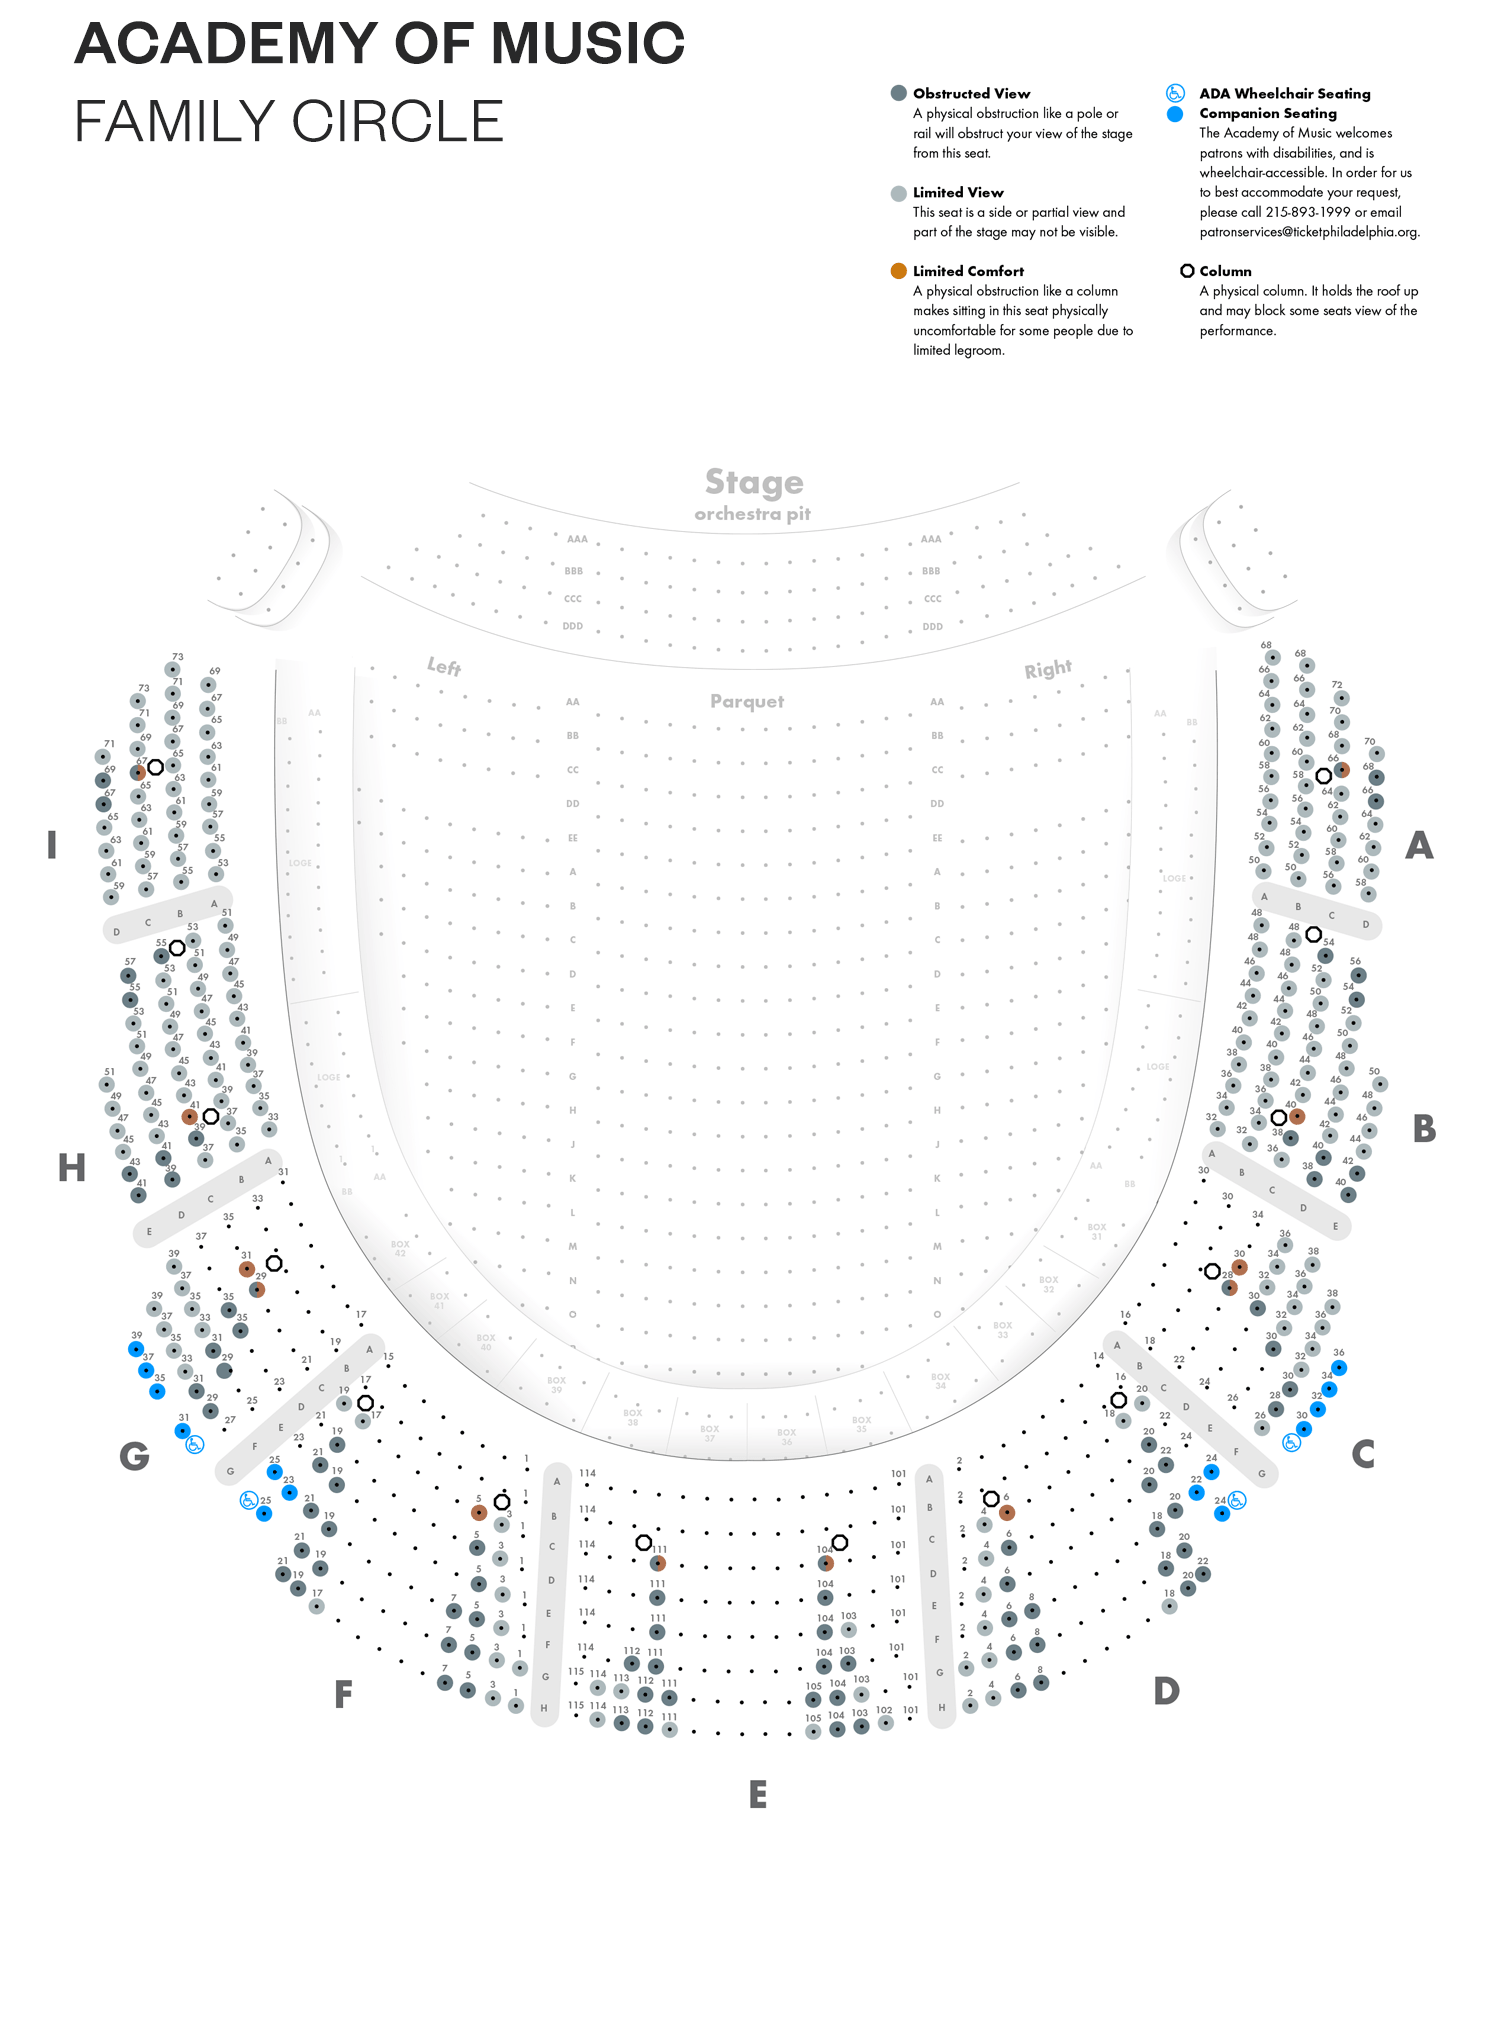 Academy of Music Broadway Family Circle Seating Chart